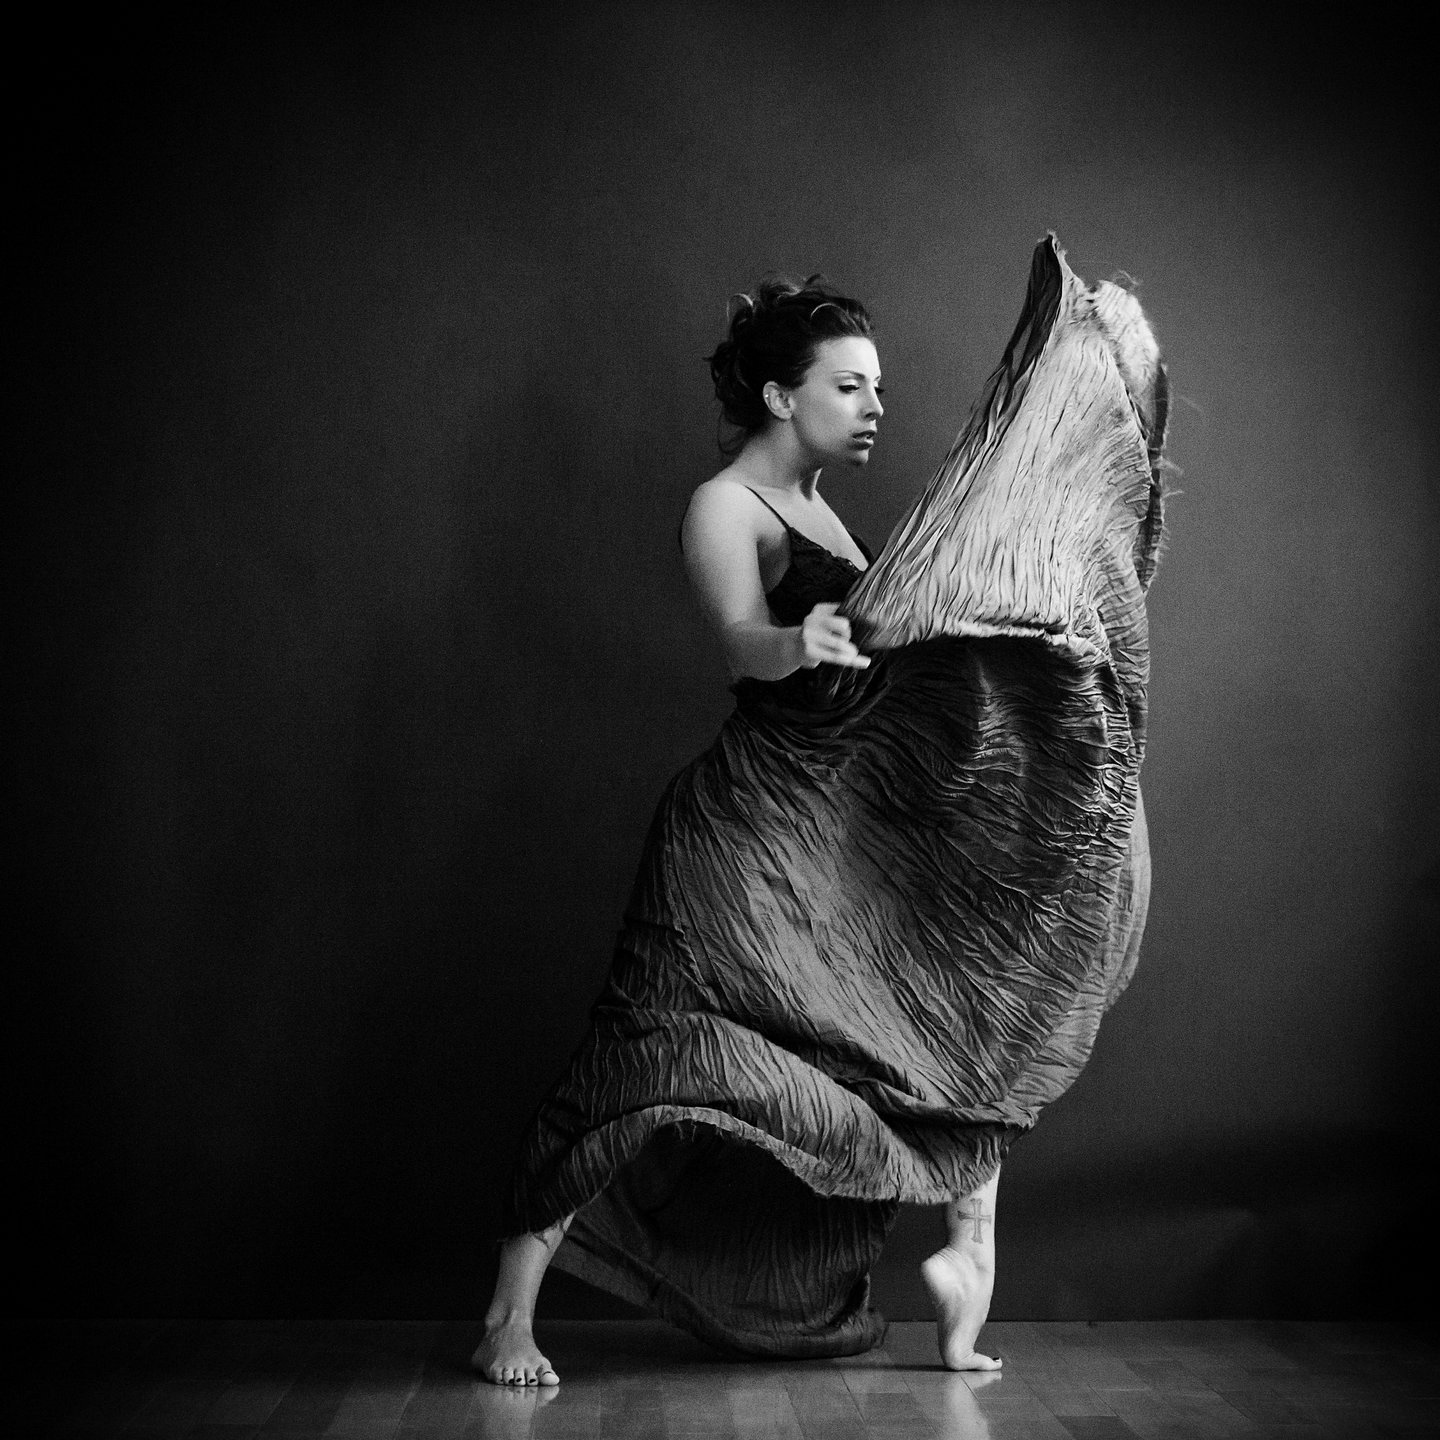 Los Angeles Dance Portrait Photo - Stephanie Abrams - by Tommy Xing Photography 14.jpg